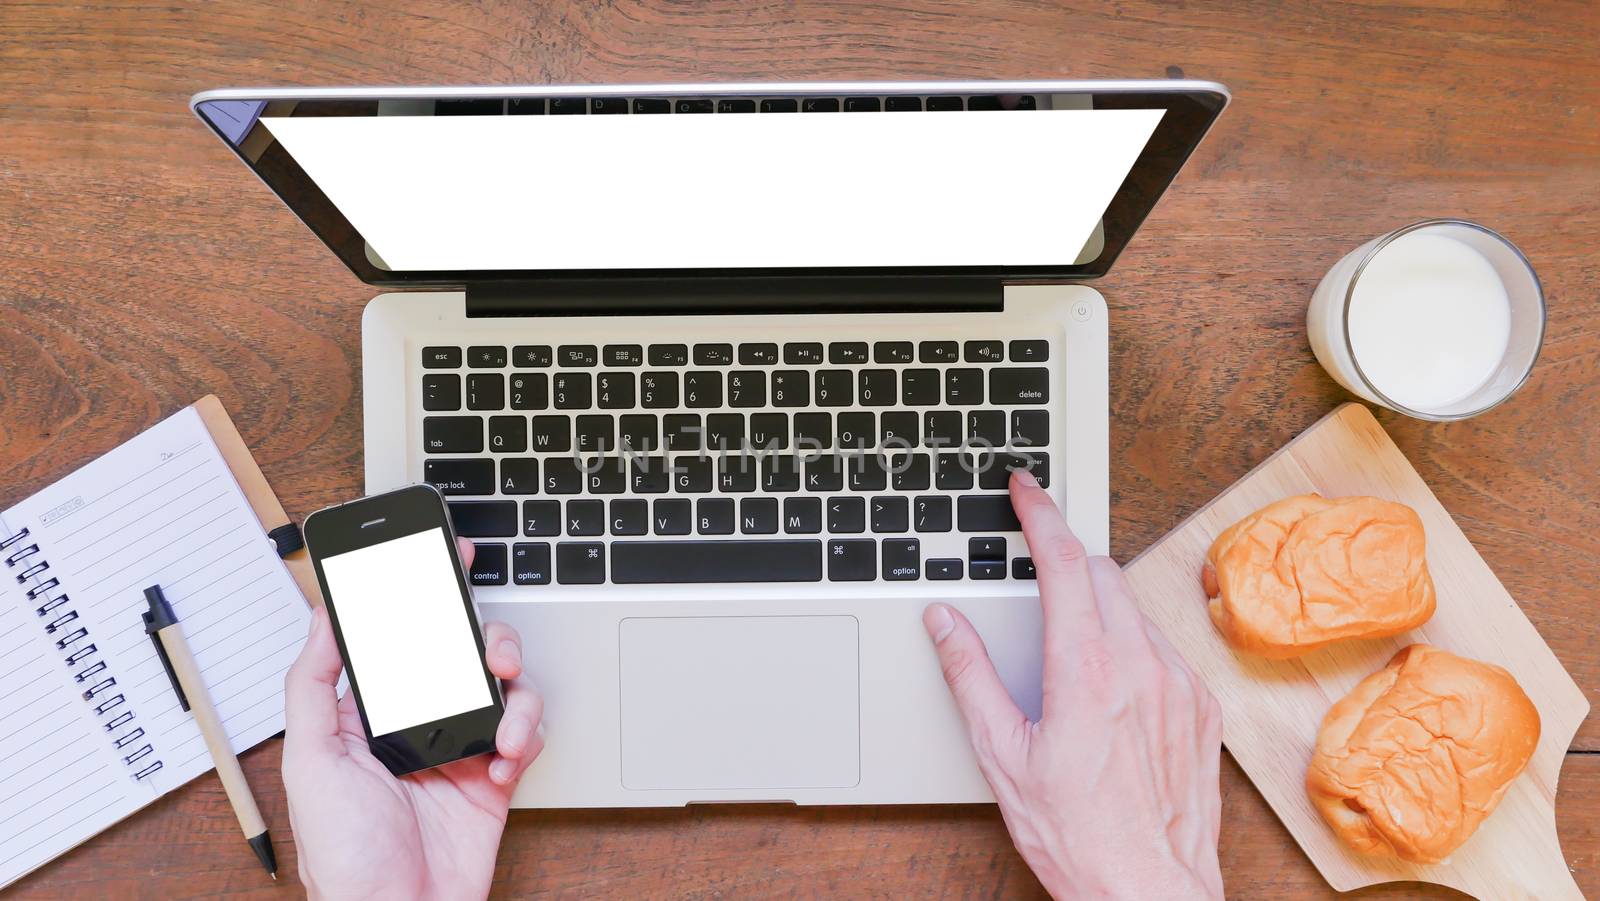 Labtop,notebook,
mobile phone and breakfast with hands on wooden table background.